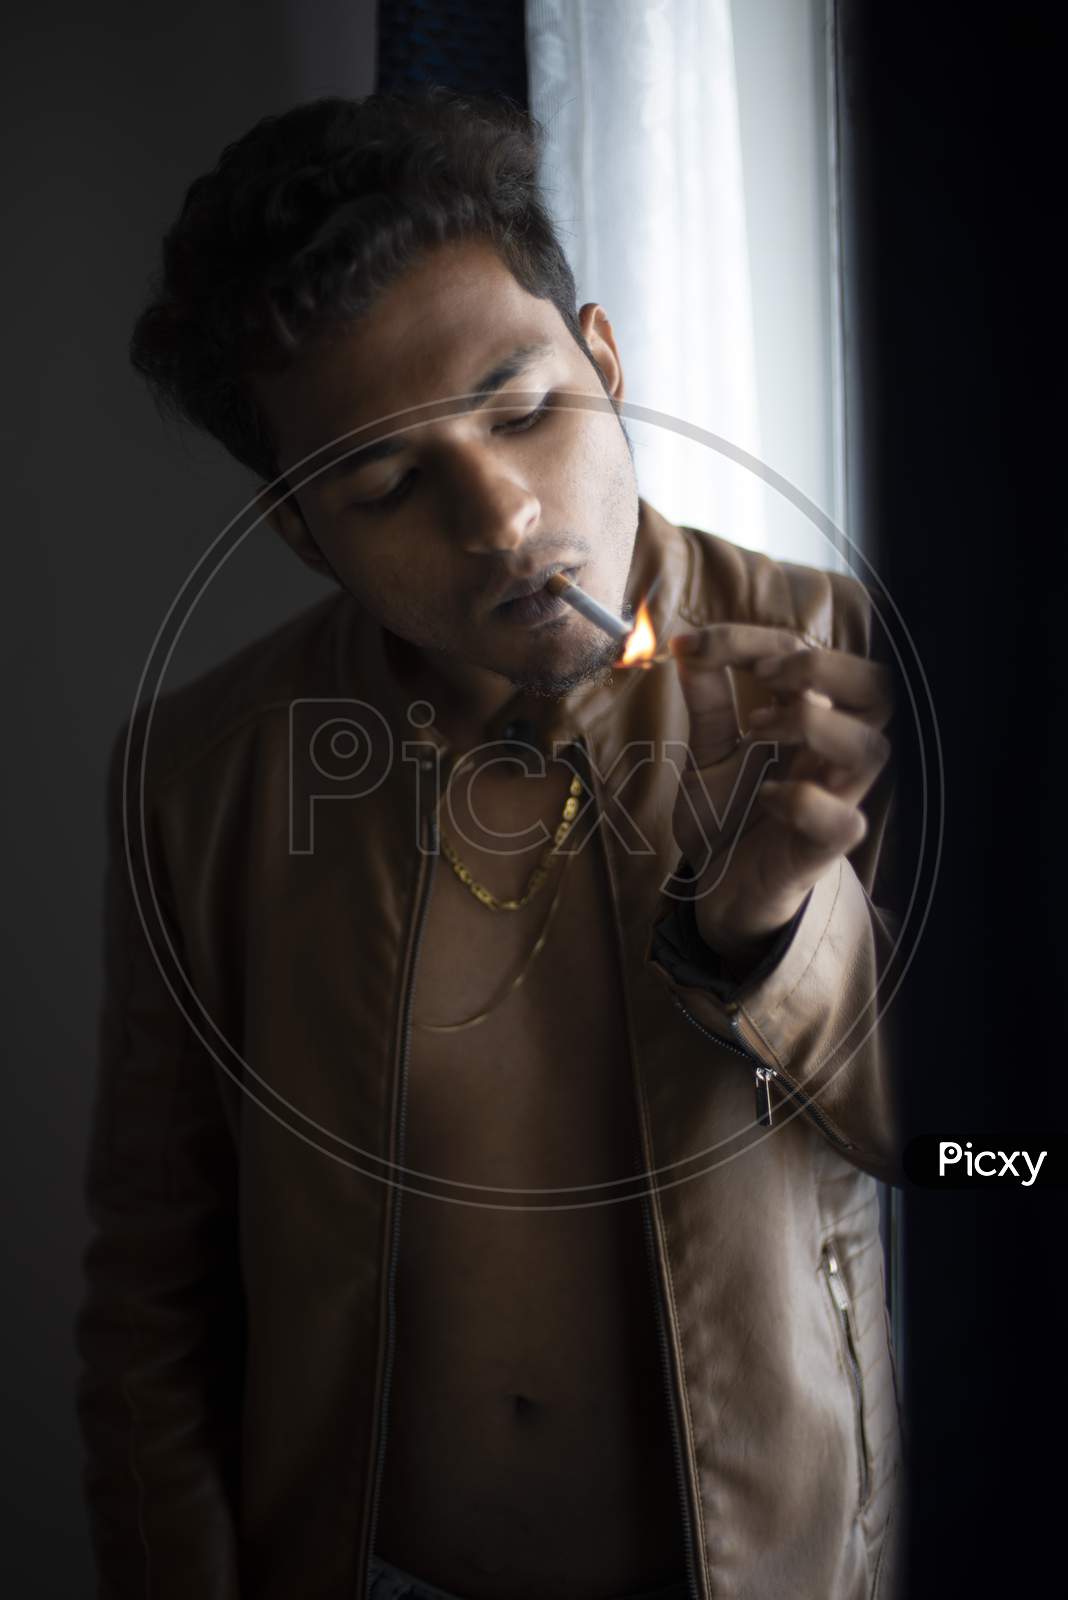 Close up portrait of an young and handsome man with front open leather jacket lightening cigarette while standing in front of a glass door of a balcony. Indian lifestyle.